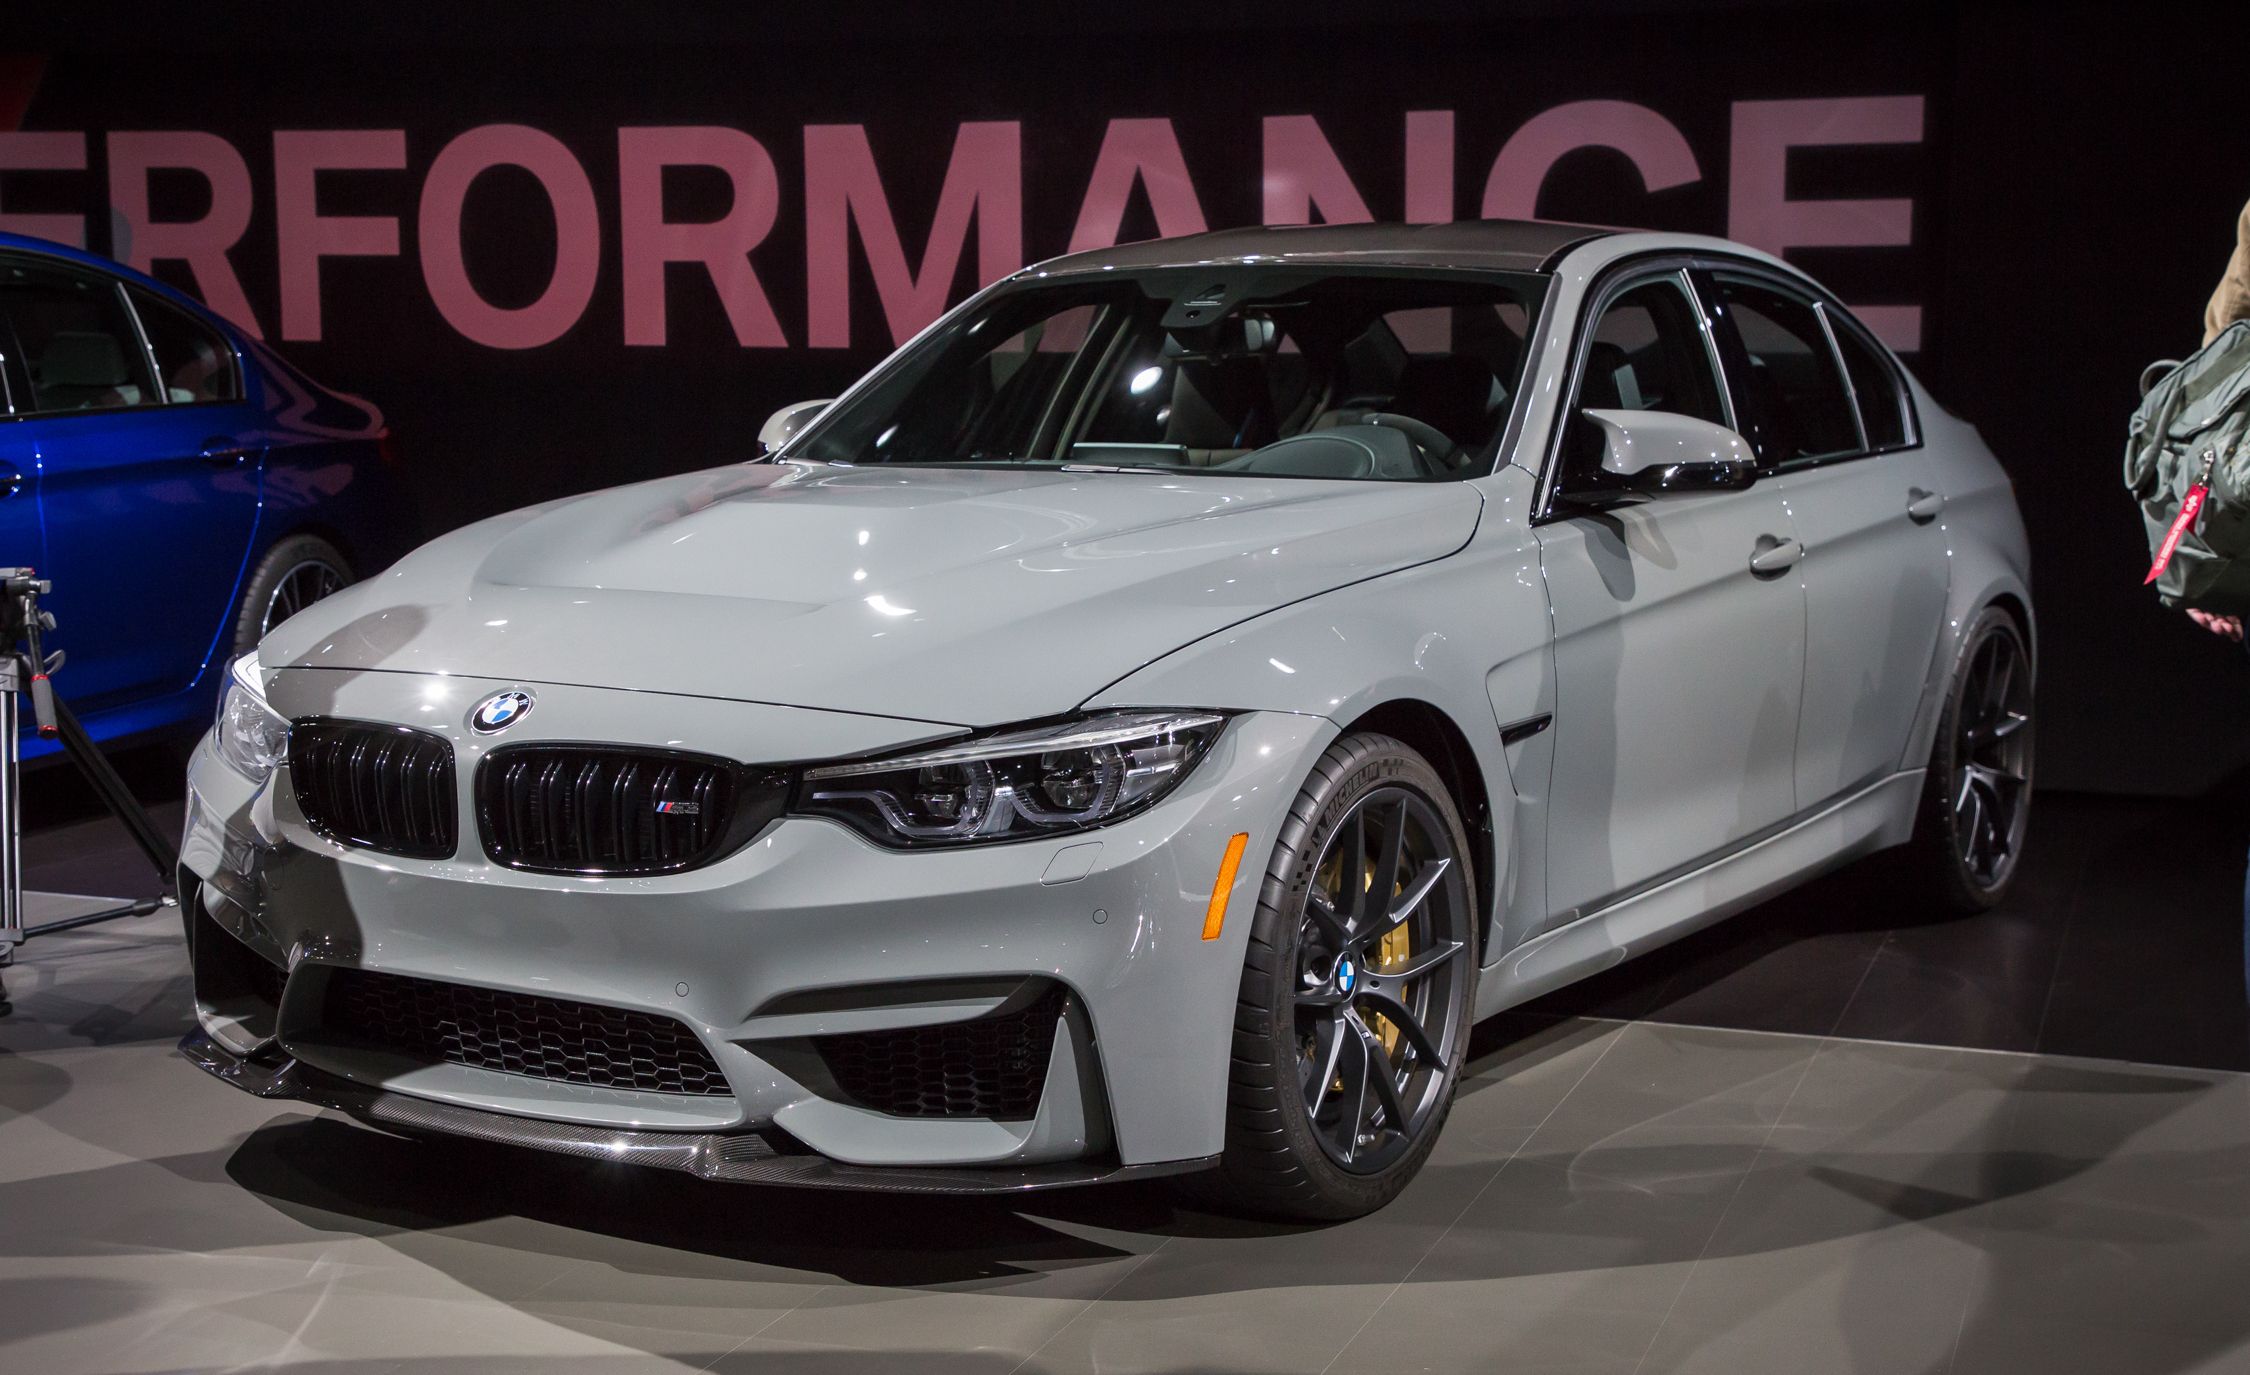 2018 BMW M3 sedan Pictures | Photo Gallery | Car and Driver